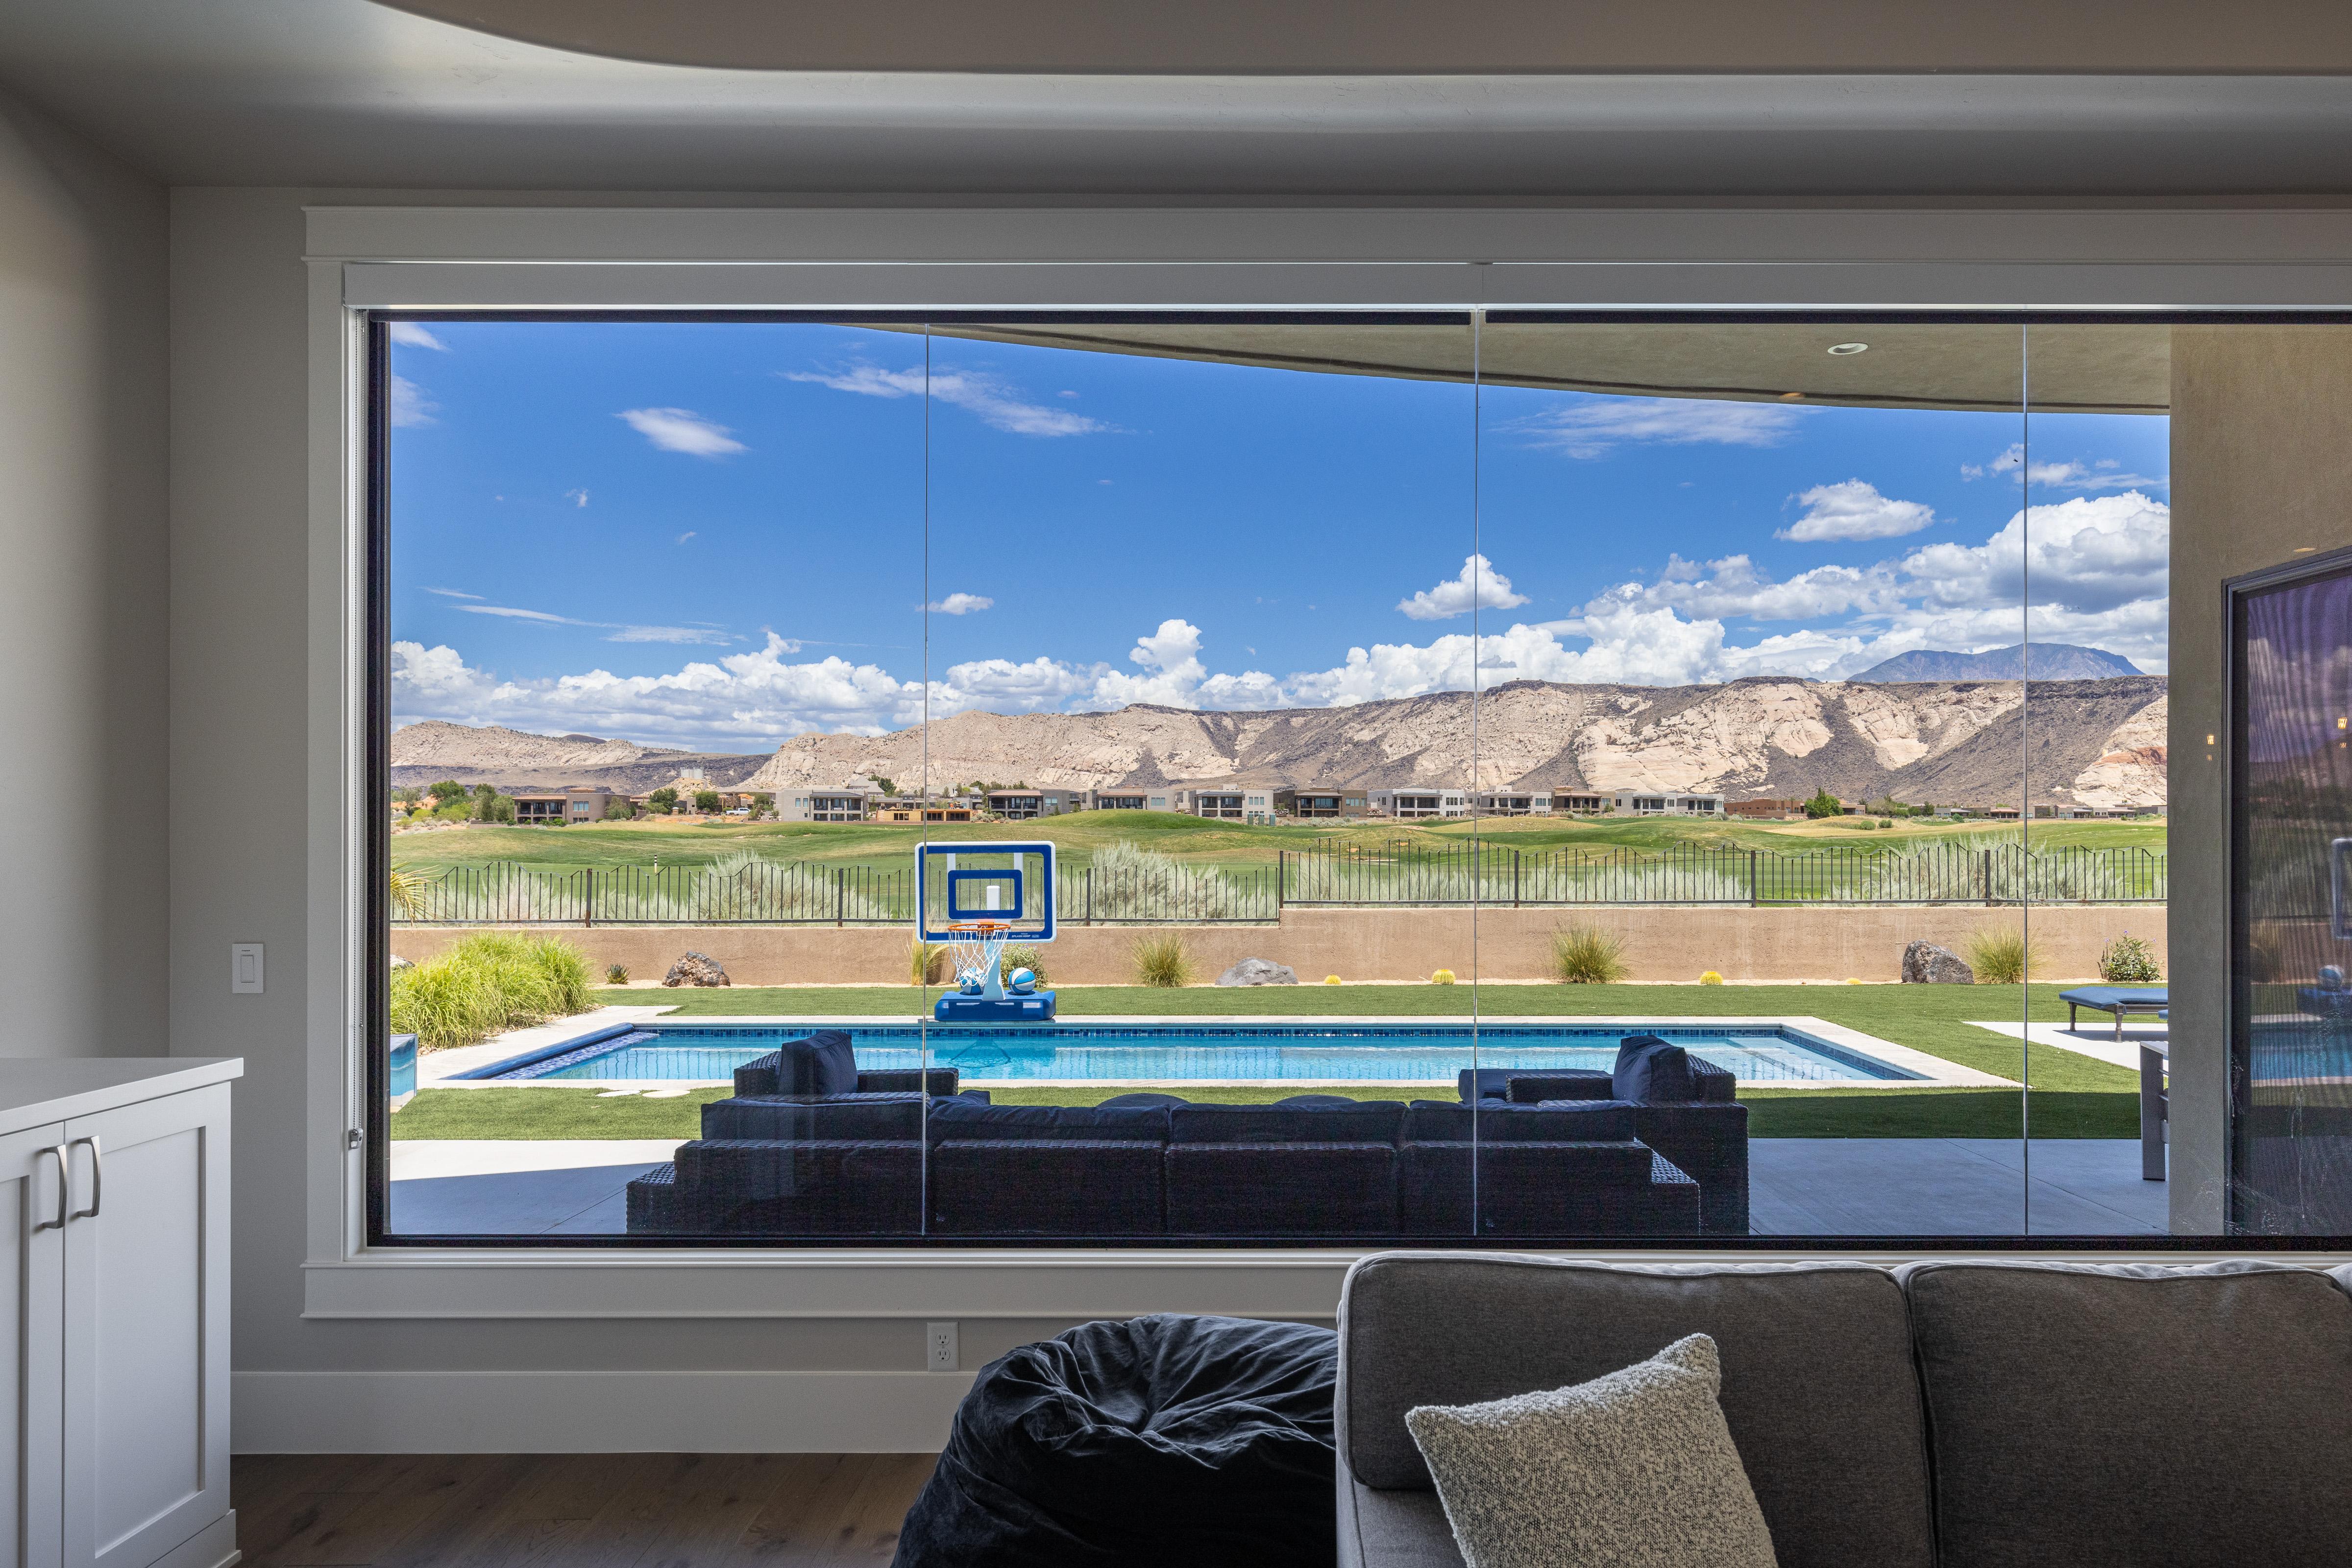 The view from the living room is picture perfect!